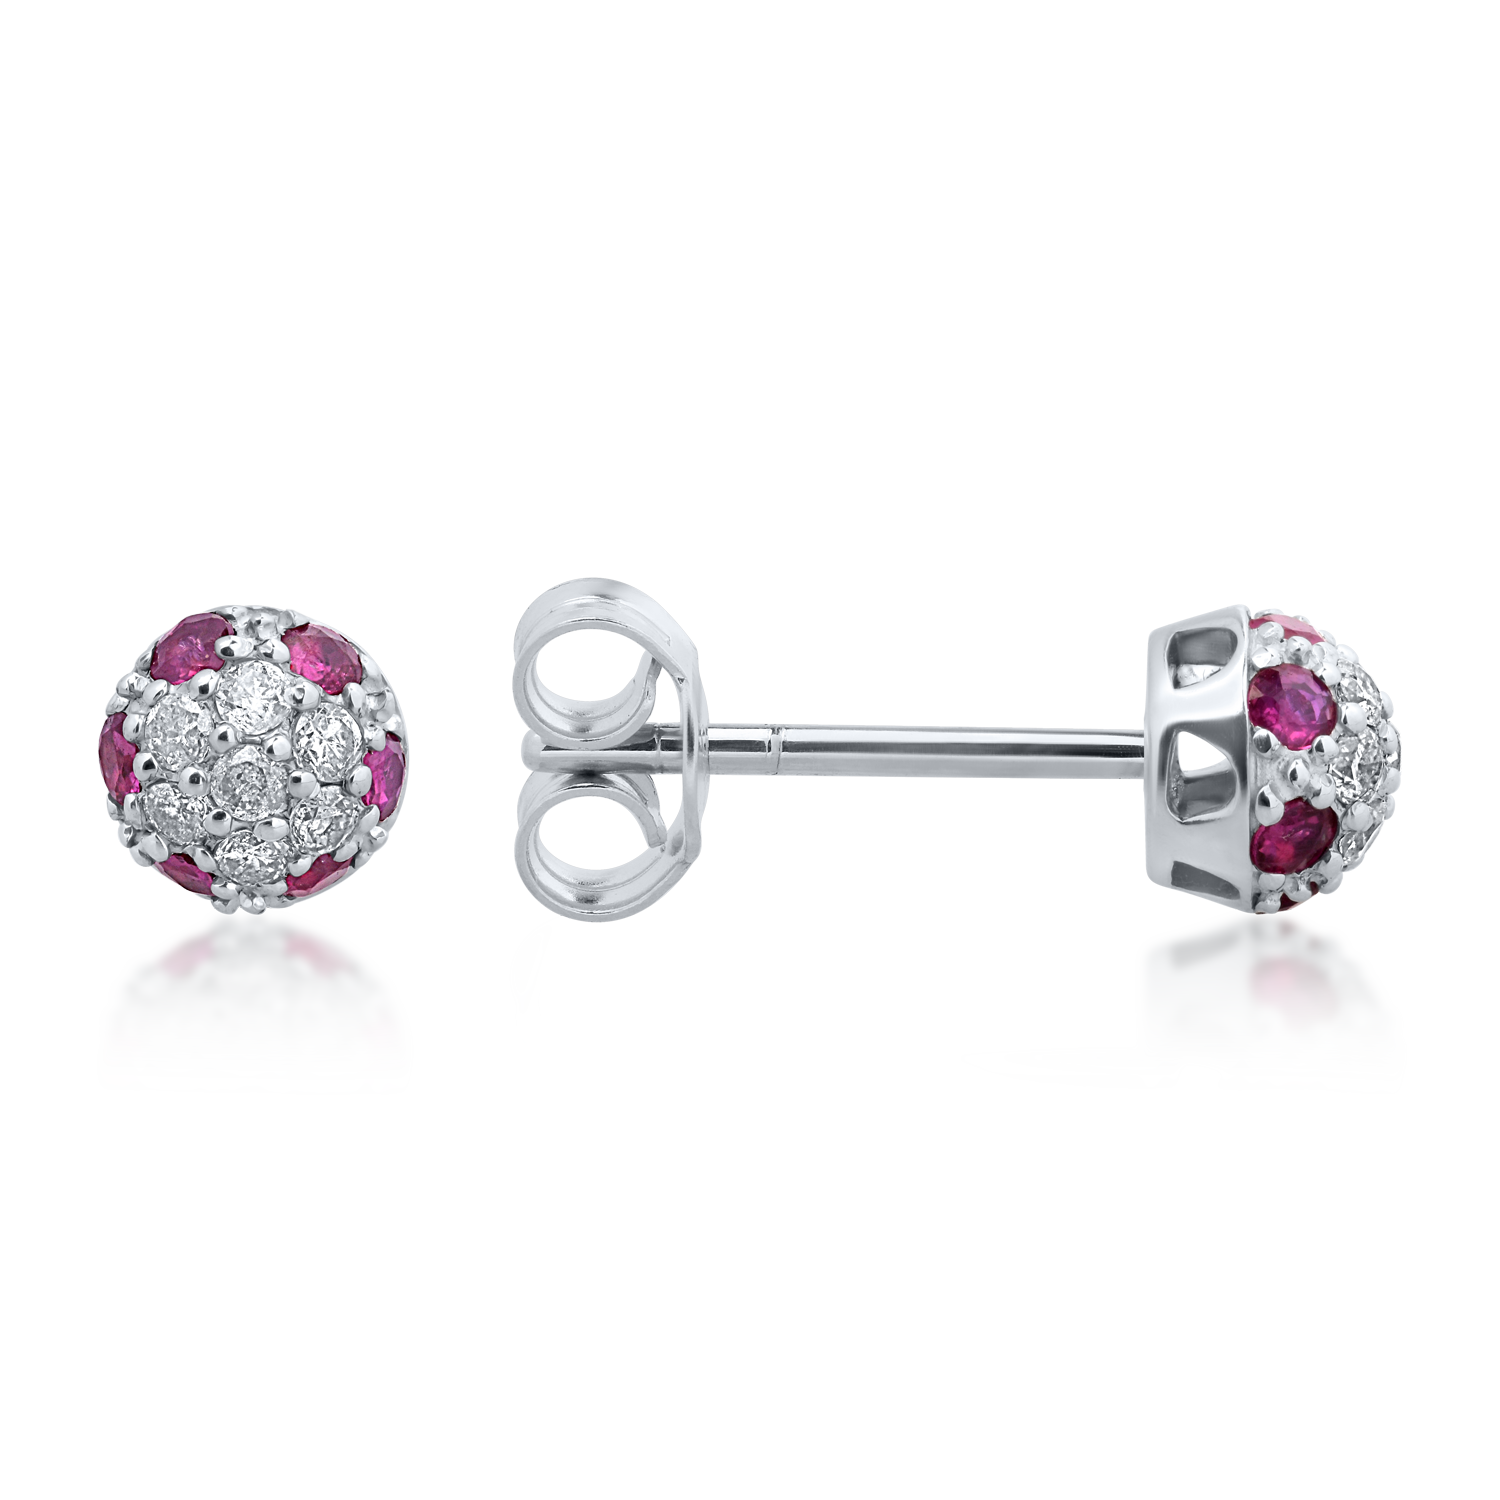 18K white gold earrings with 0.31ct rubies and 0.19ct diamonds